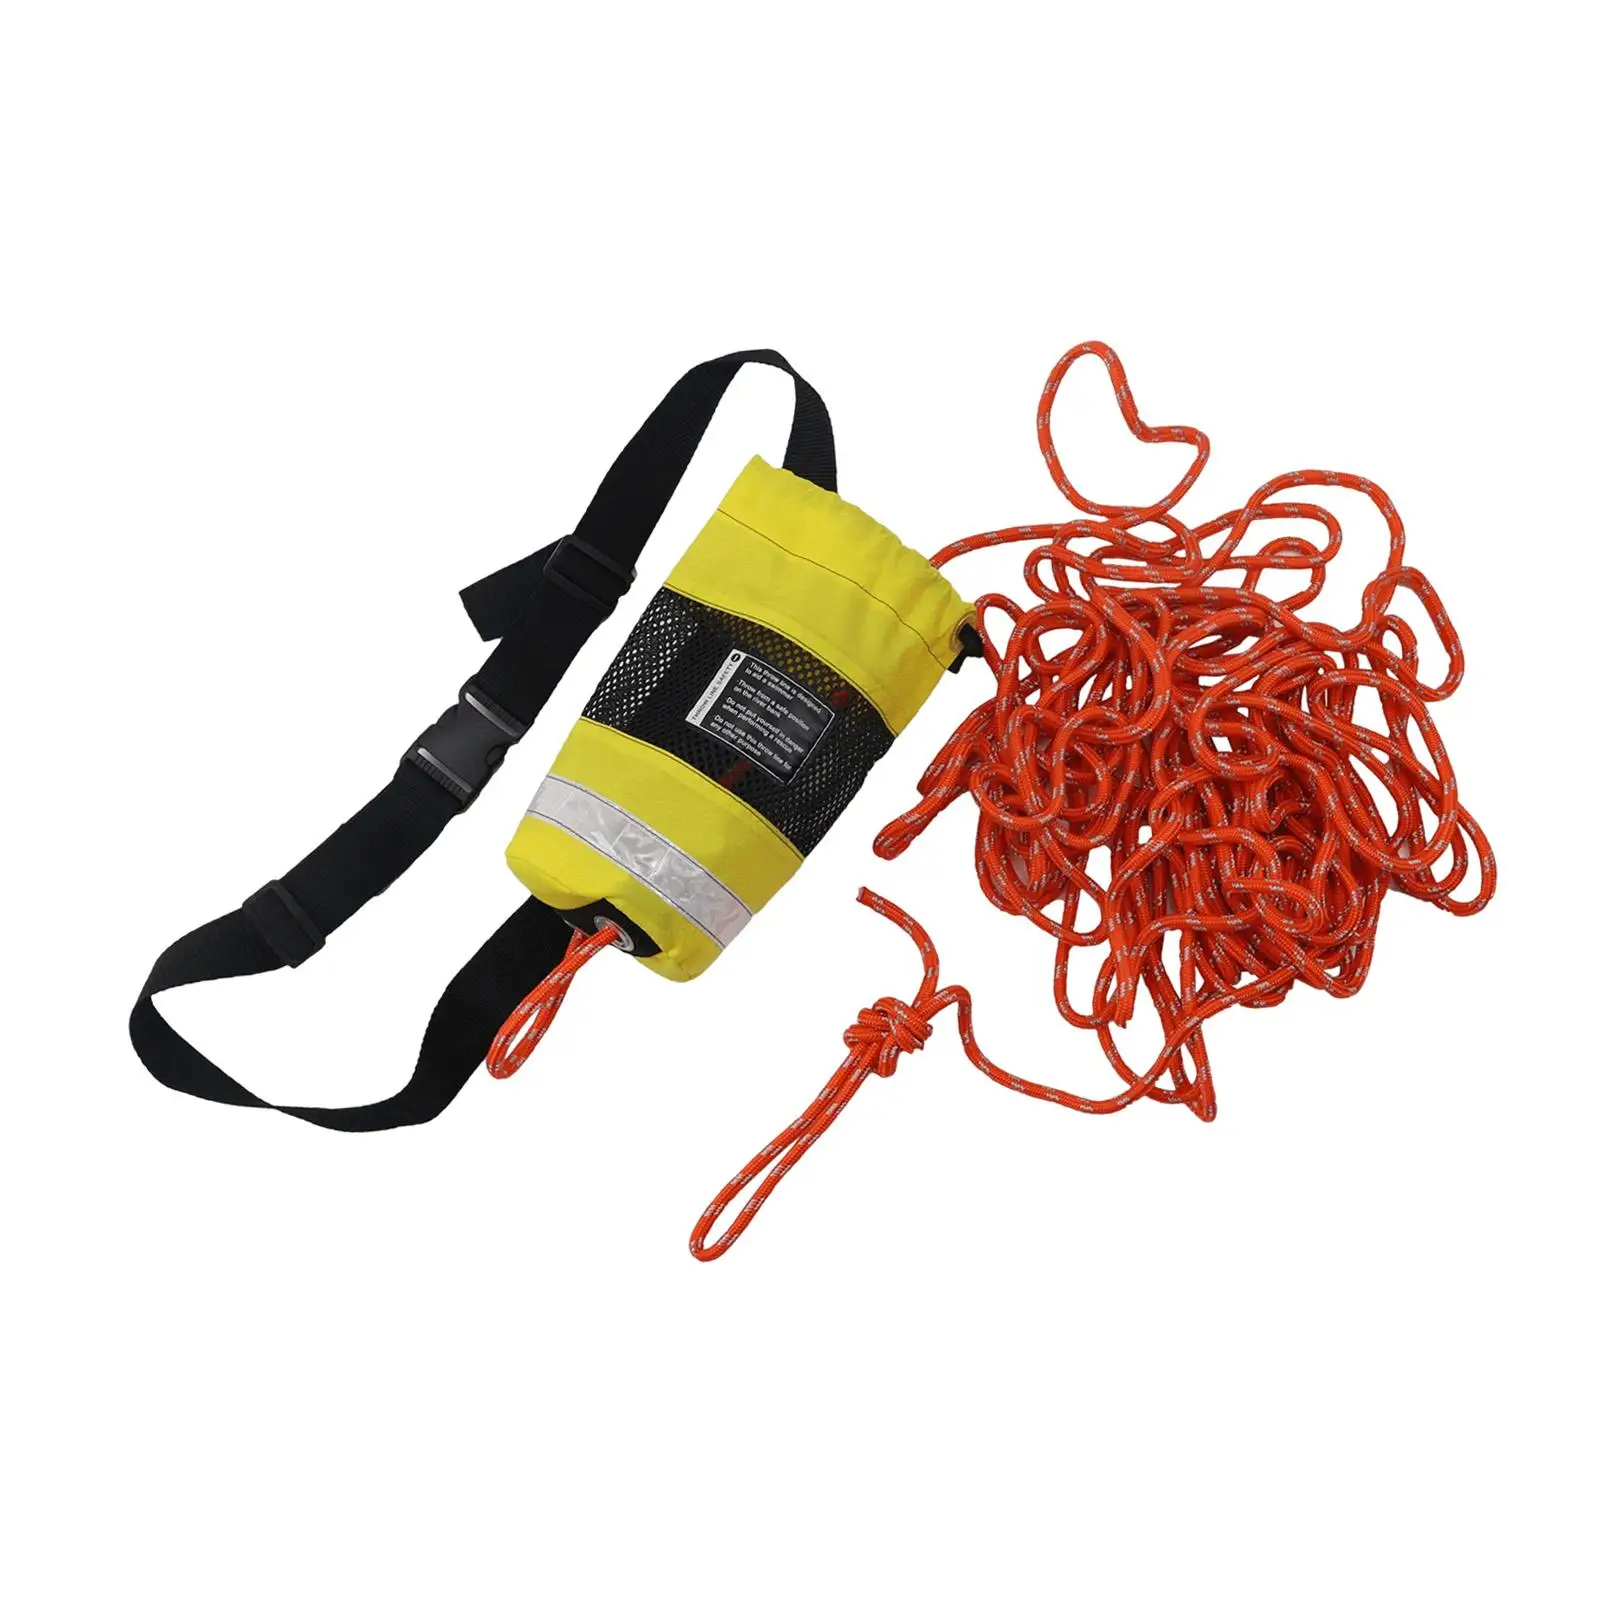 69ft Length Throw Bag, Rescue Rope Throw Rope Bag High Visibility Throwing Pouch